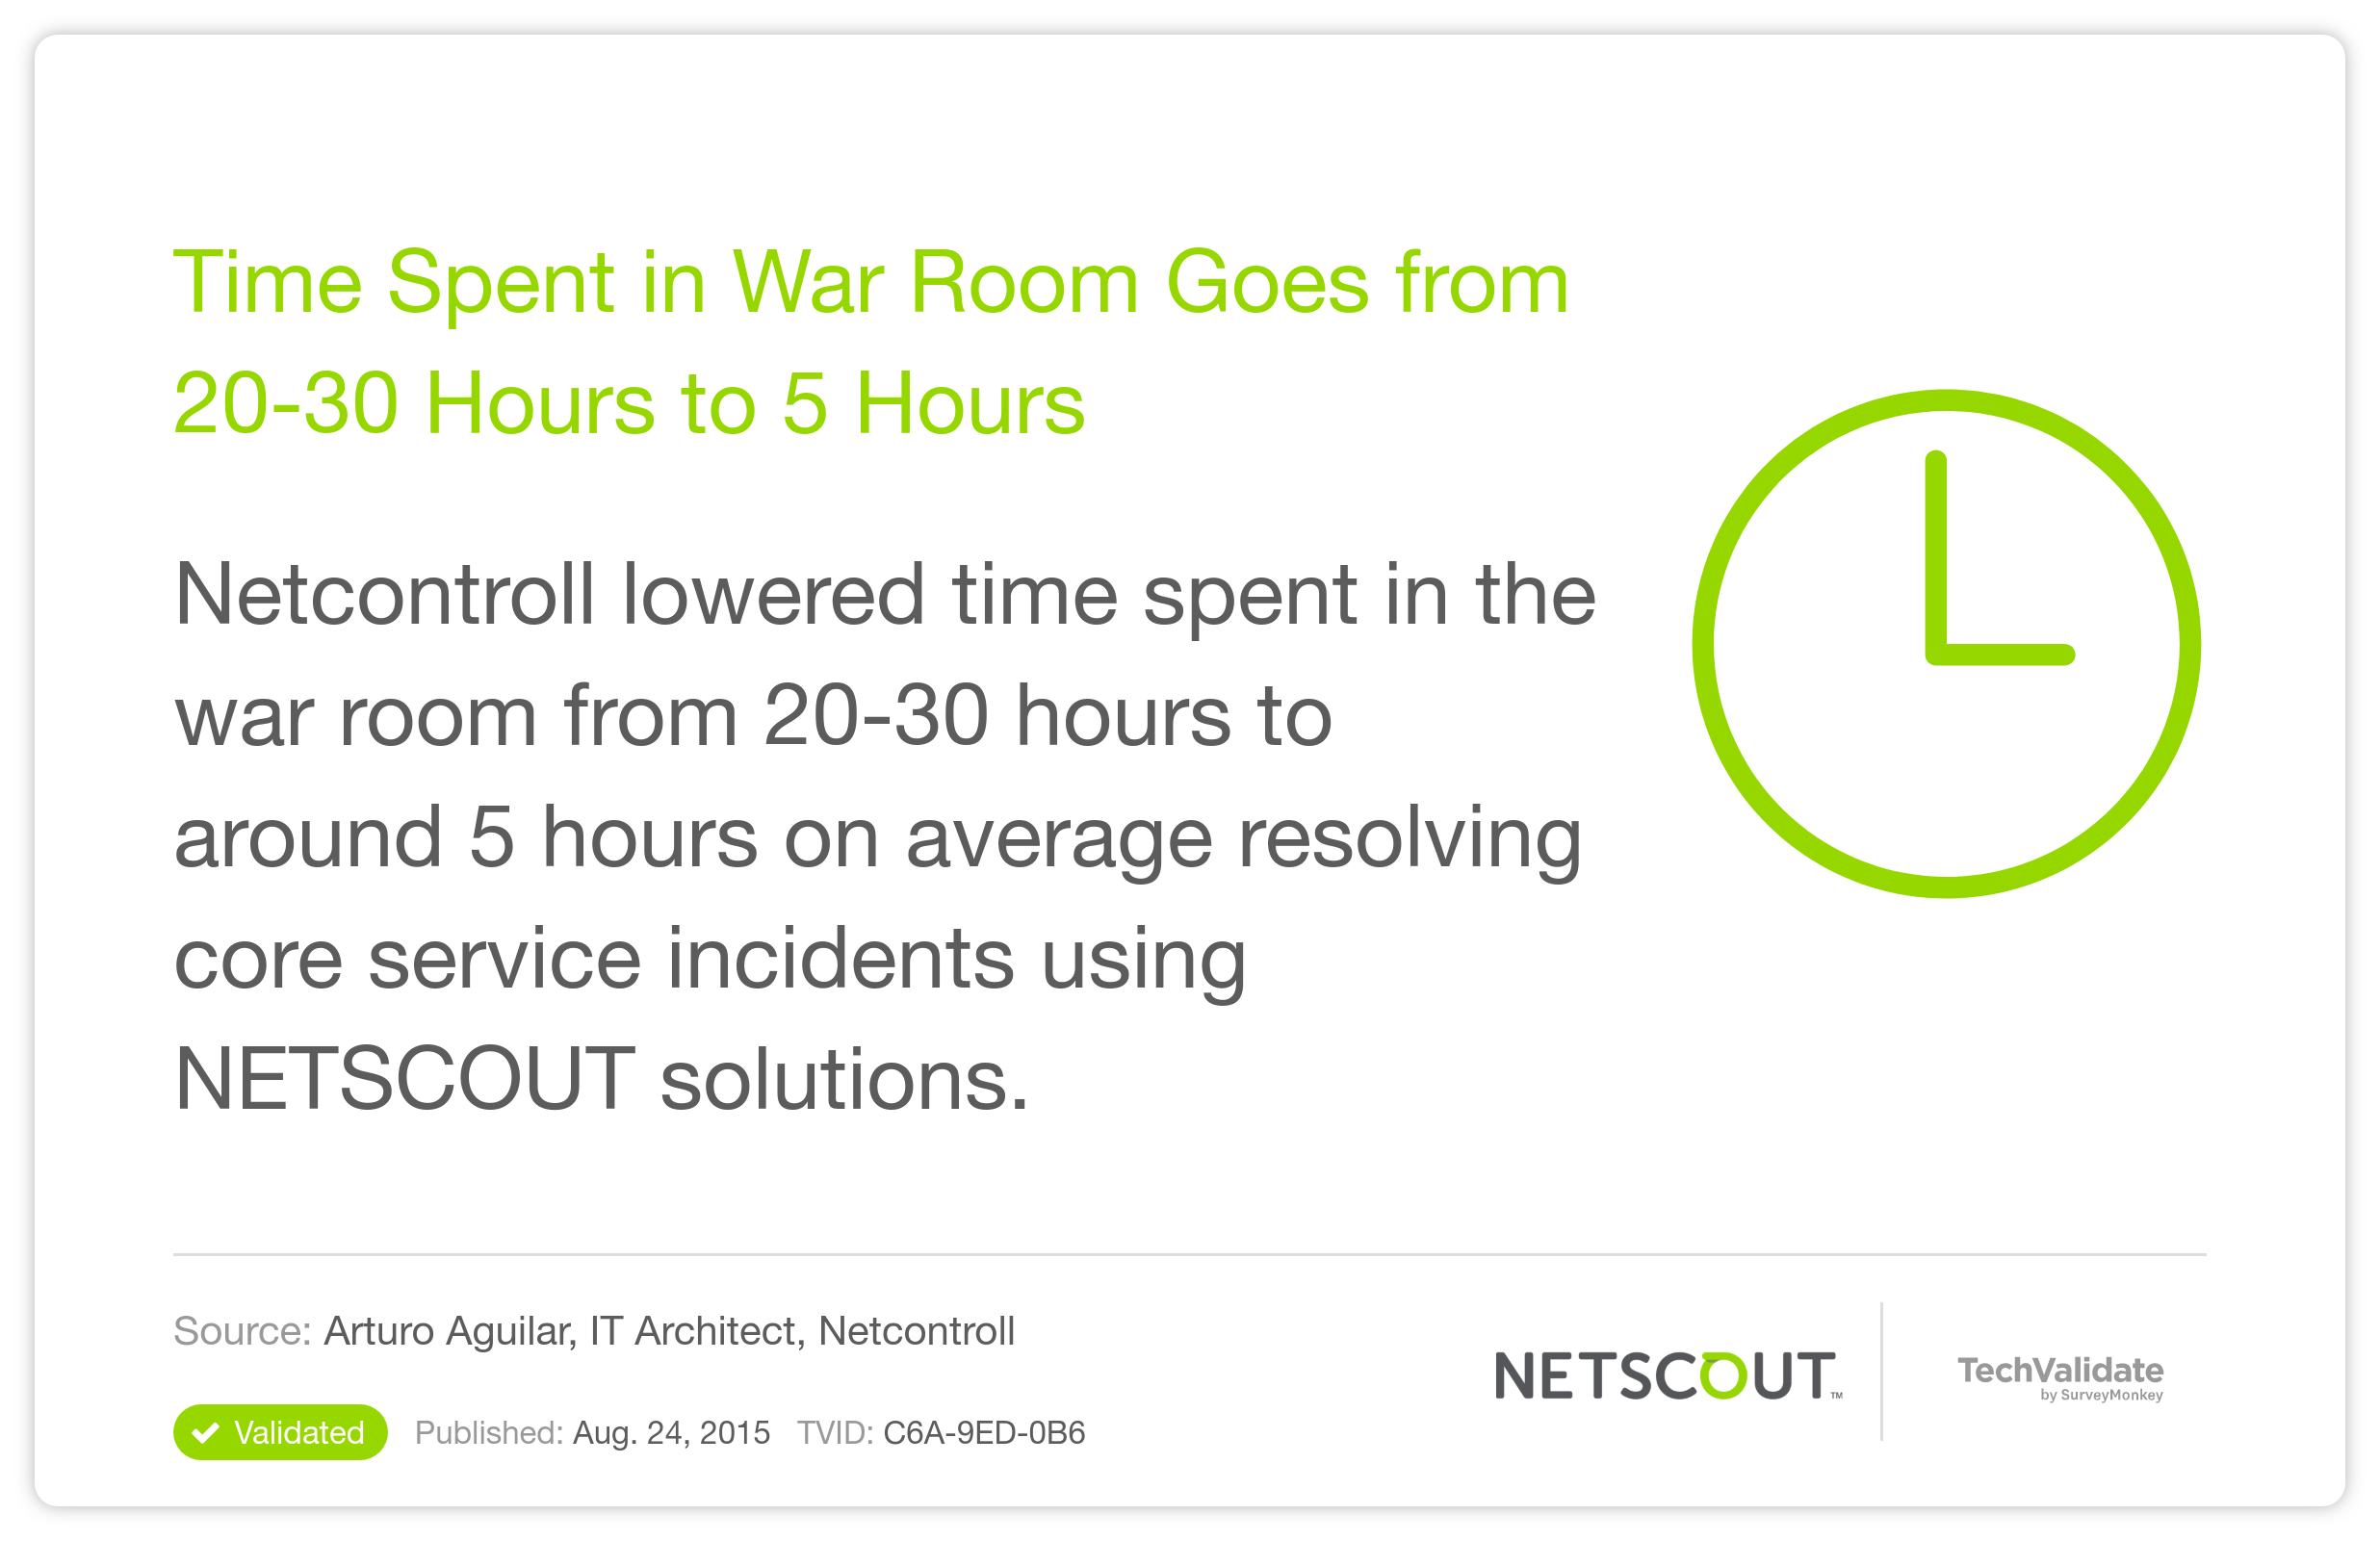 Time Spent in War Room Goes from 20-30 Hours to 5 Hours